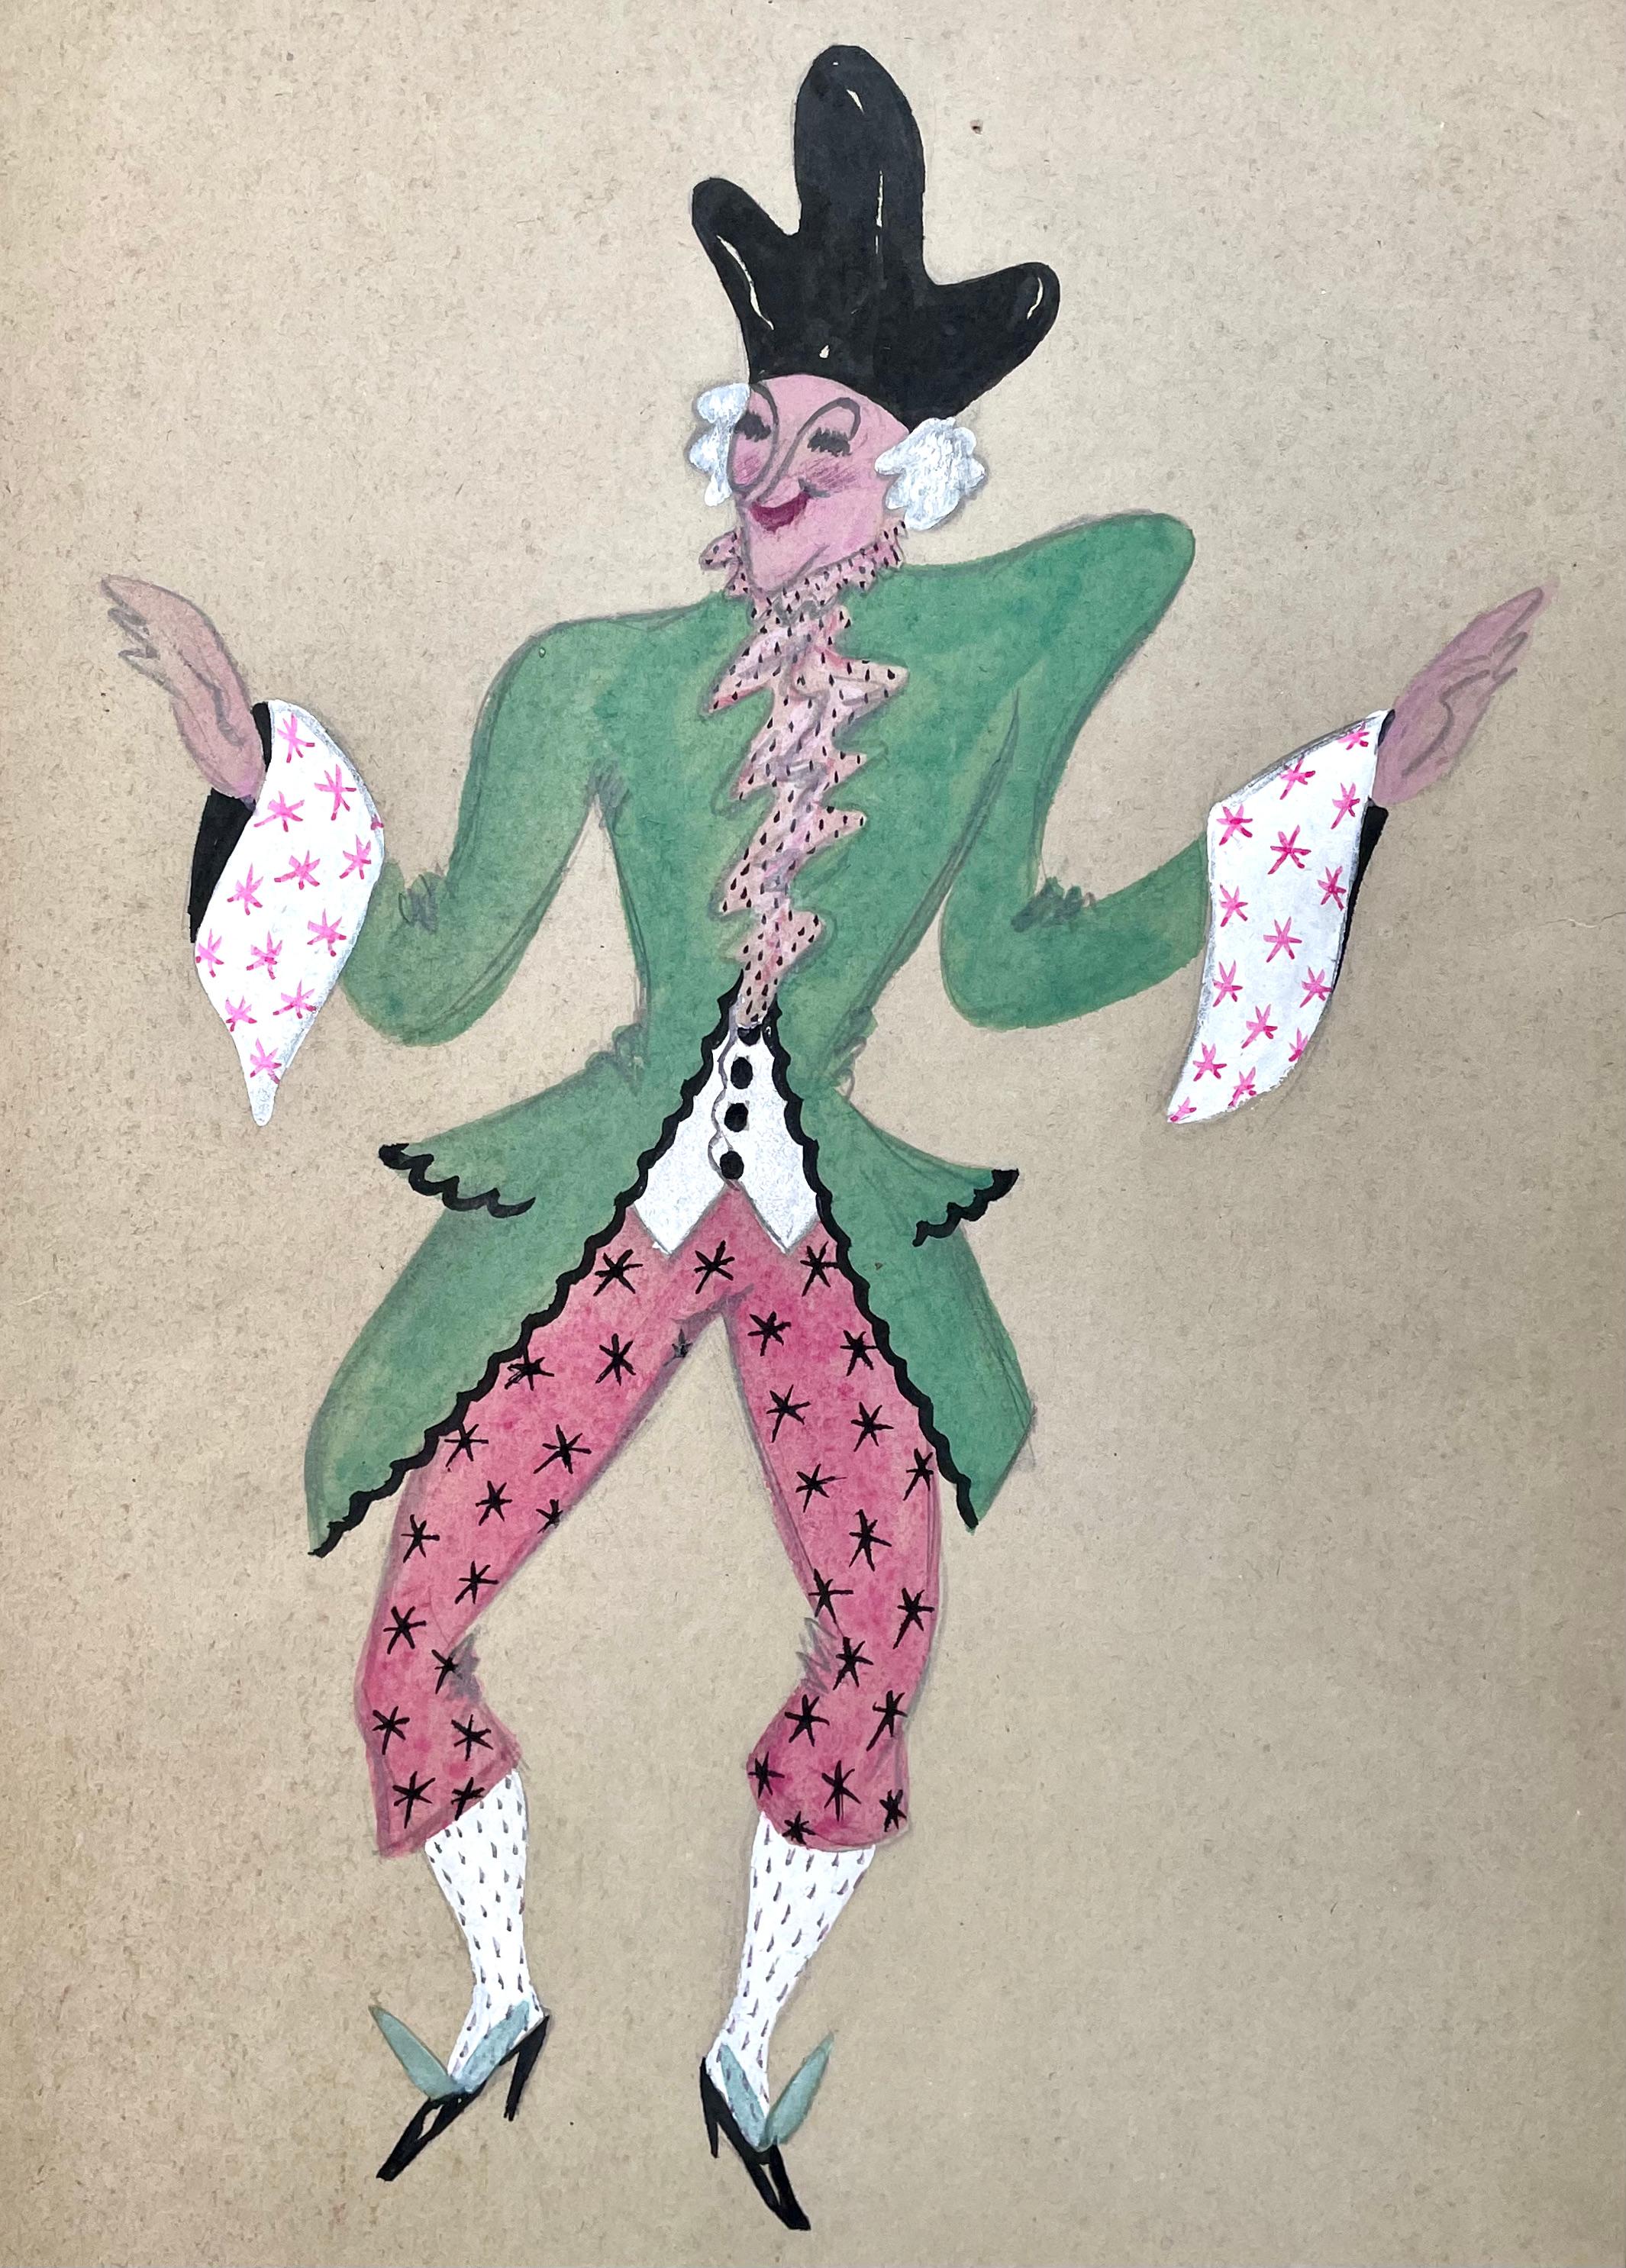 JOHN DRONSFIELD
(1900-1951)

Costume Design with Green Jacket

Watercolour and bodycolour over pencil
Unframed, in mount only

40 by 28.5 cm., 15 ¾  by 11 ¼  in.
(mount size 53 by 41 cm., 20 ¾ by 16 in.)

John Marsden Dronsfield was born in